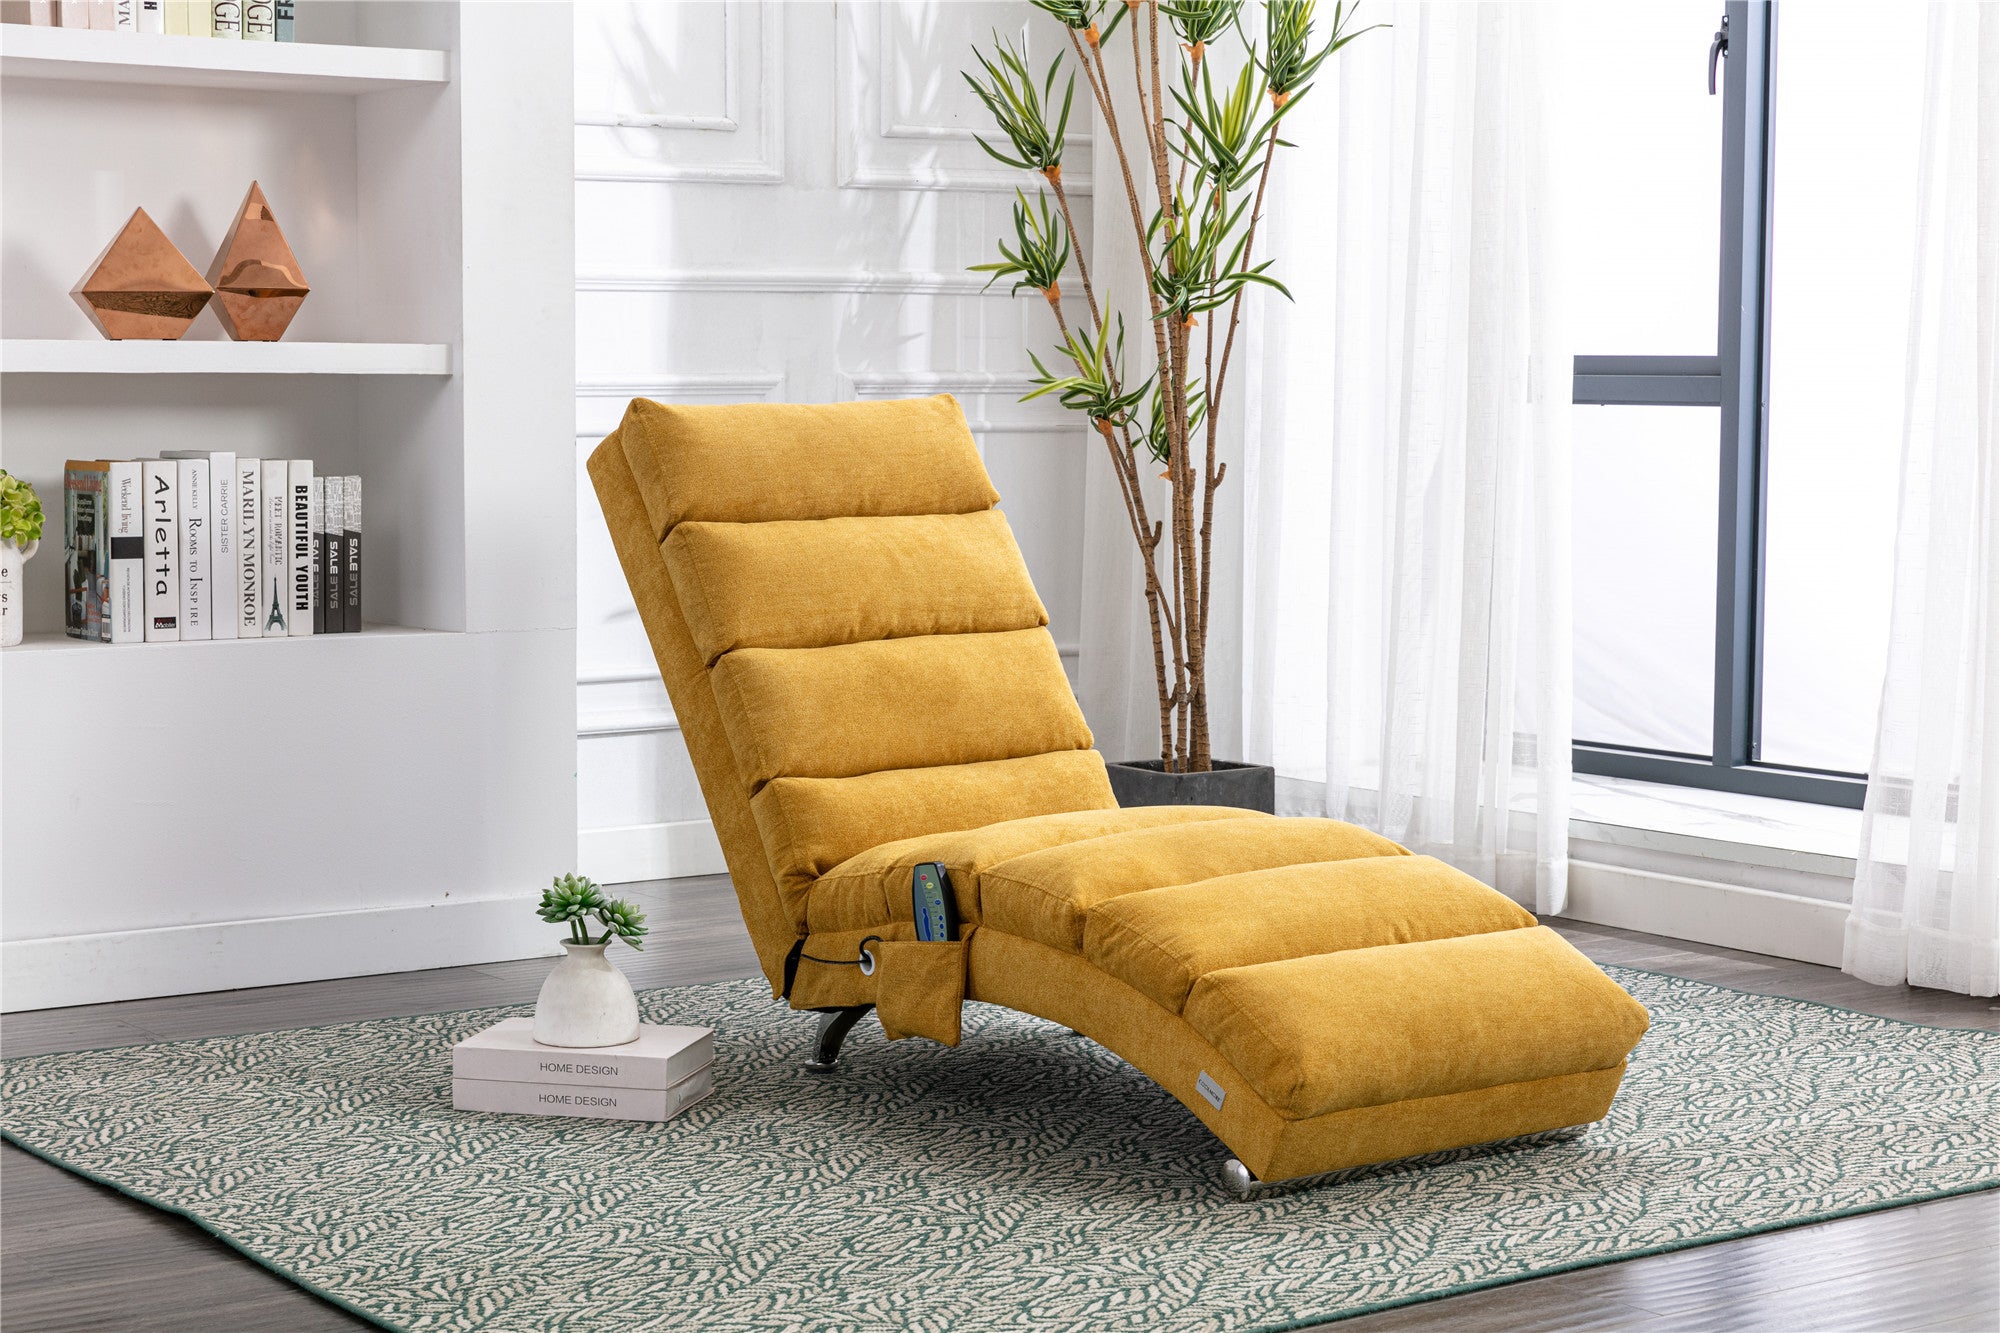 COOLMORE Linen Chaise Lounge Indoor Chair, Modern Long Lounger for Office or Living Room